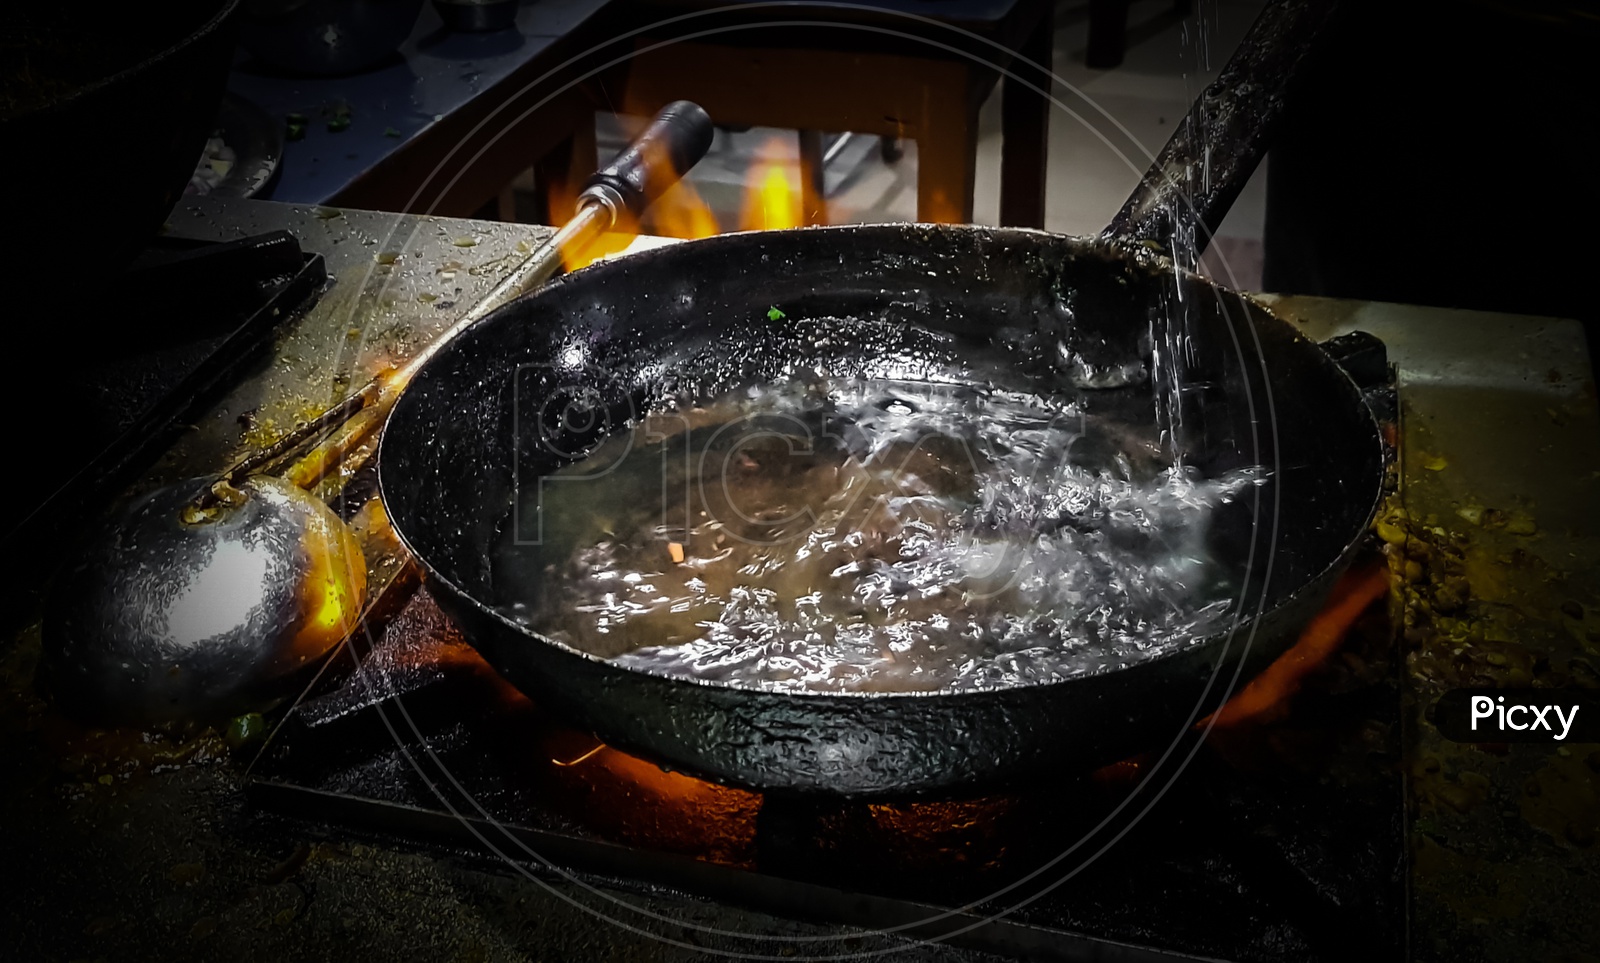 Cooking Tadka Fry In A Frying Pan At A Road Side Food Corner On A Stove Over Flames